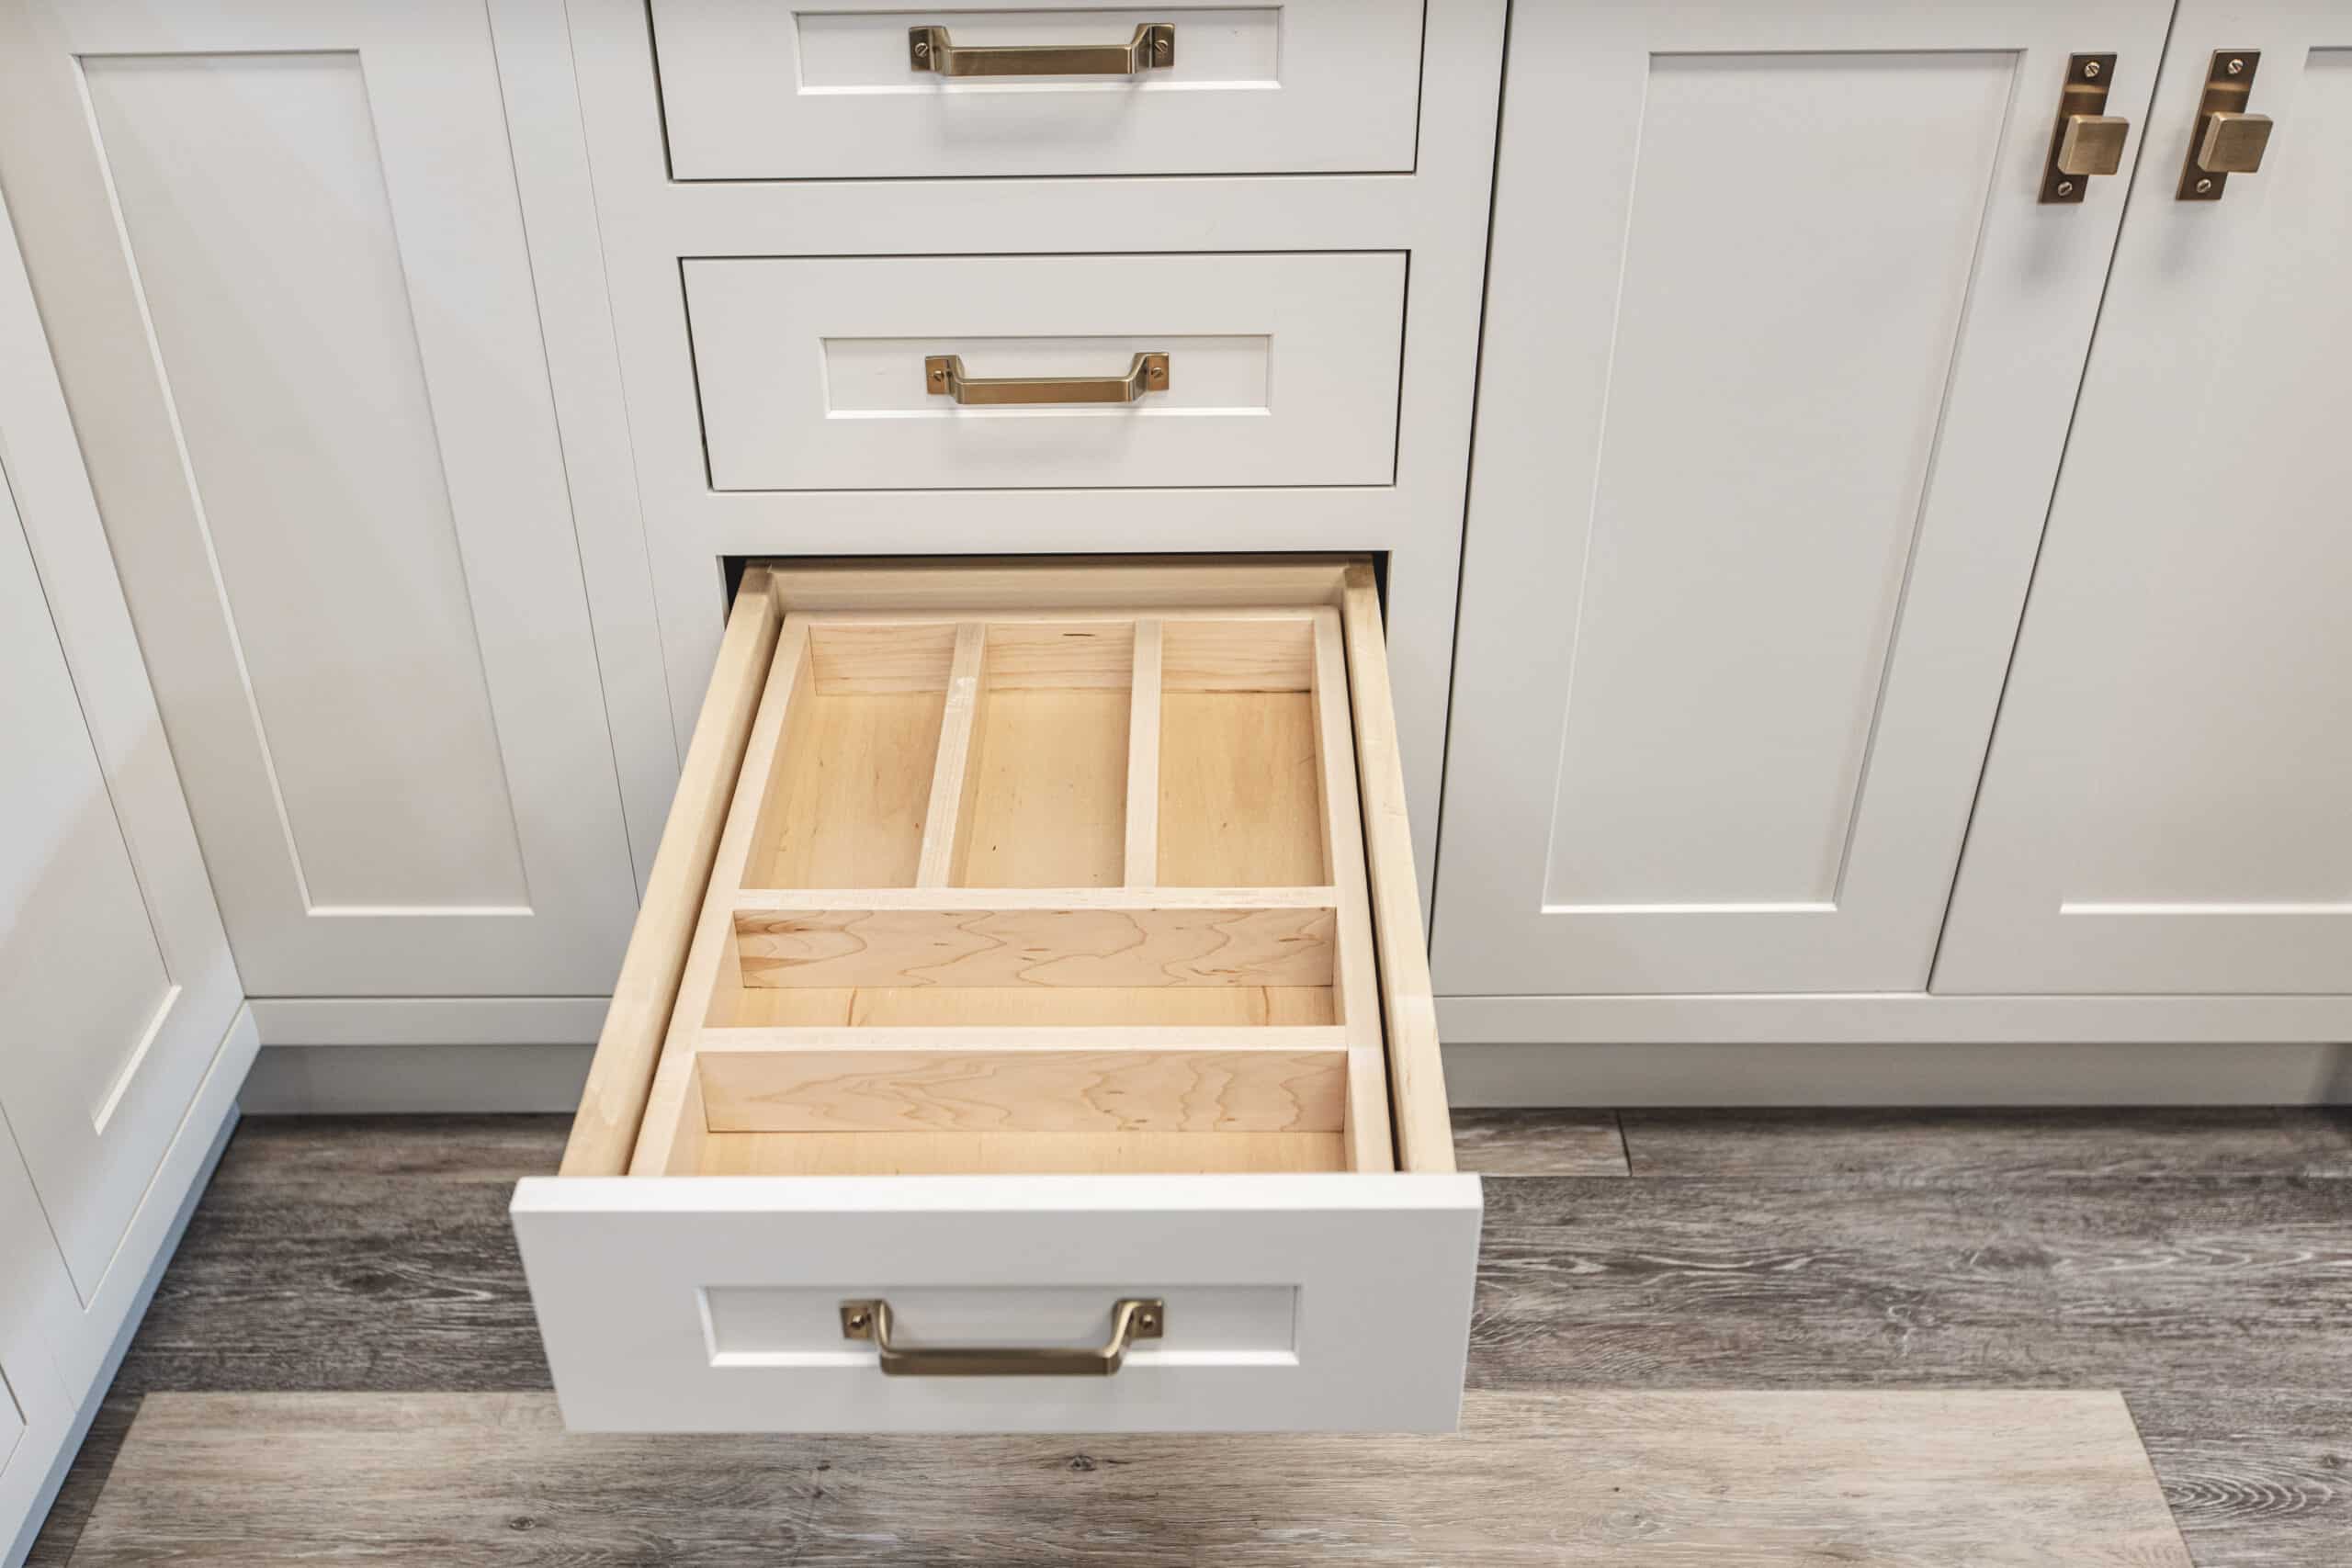 A wooden drawer with two compartments